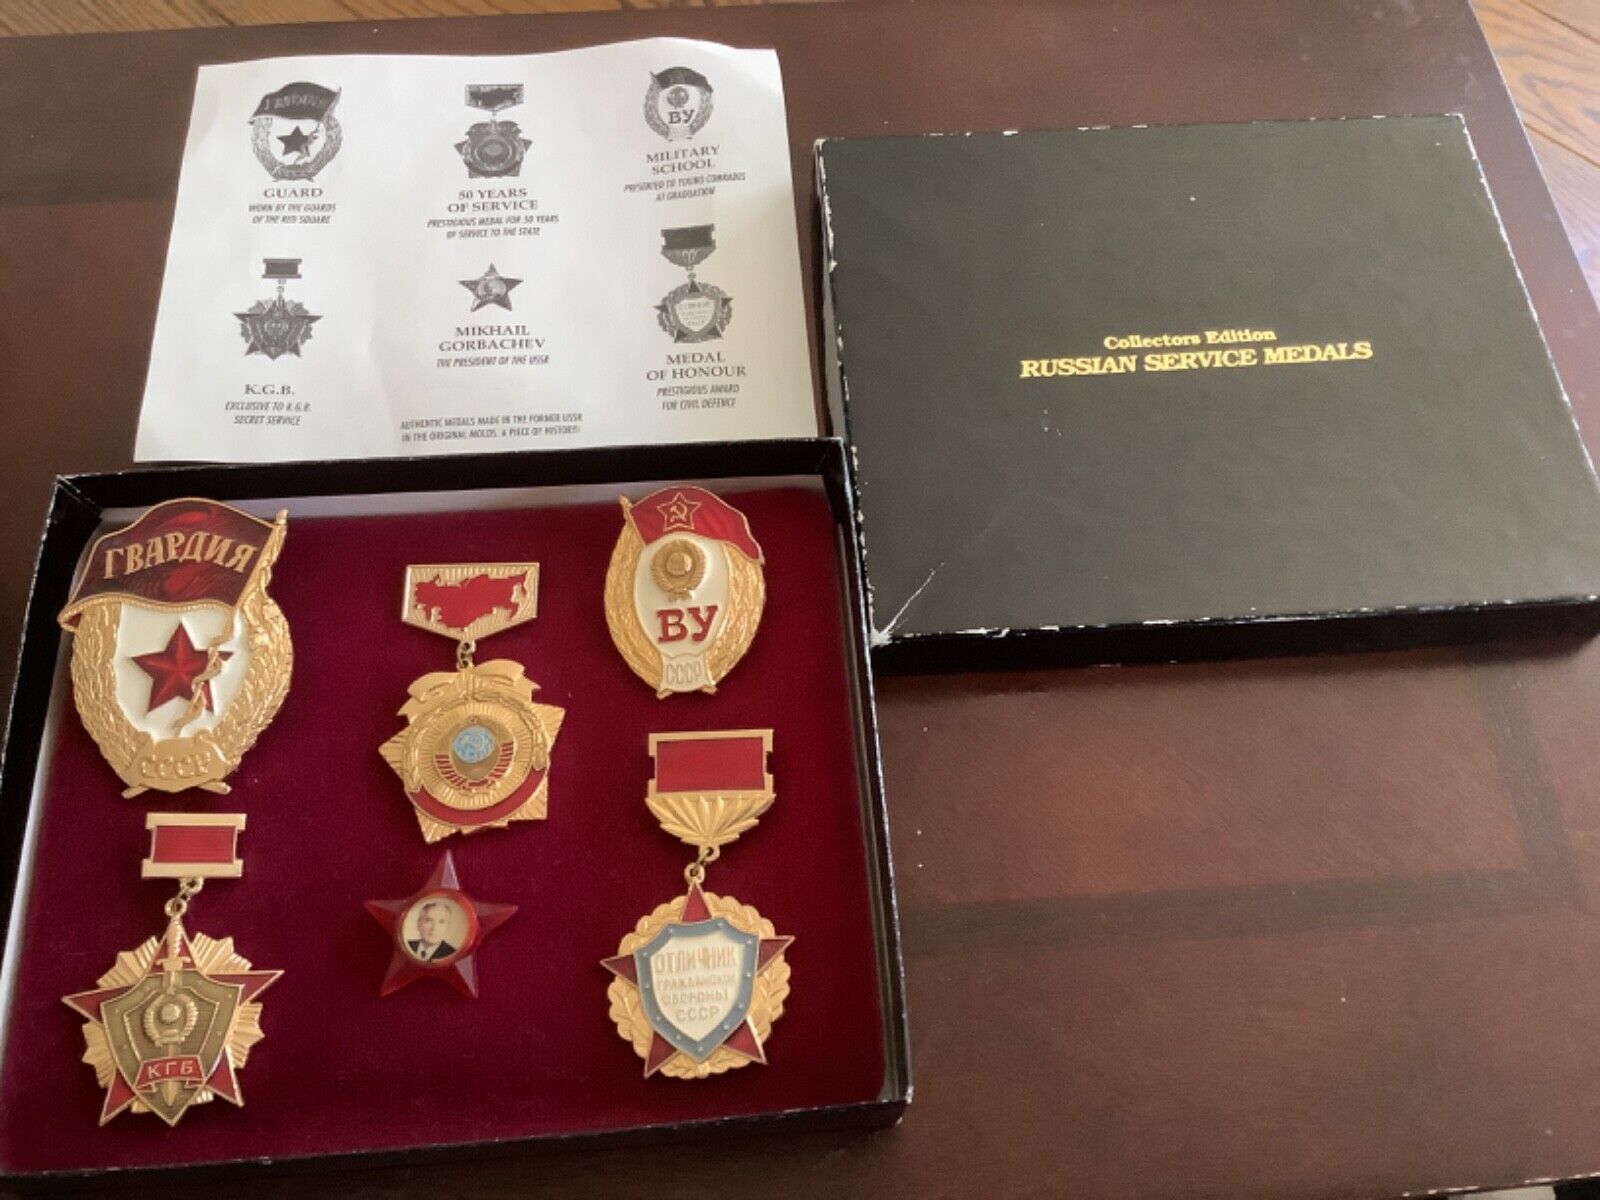 Collectors Edition Russian Service Medals - Boxed - Mikhail Gorbachev